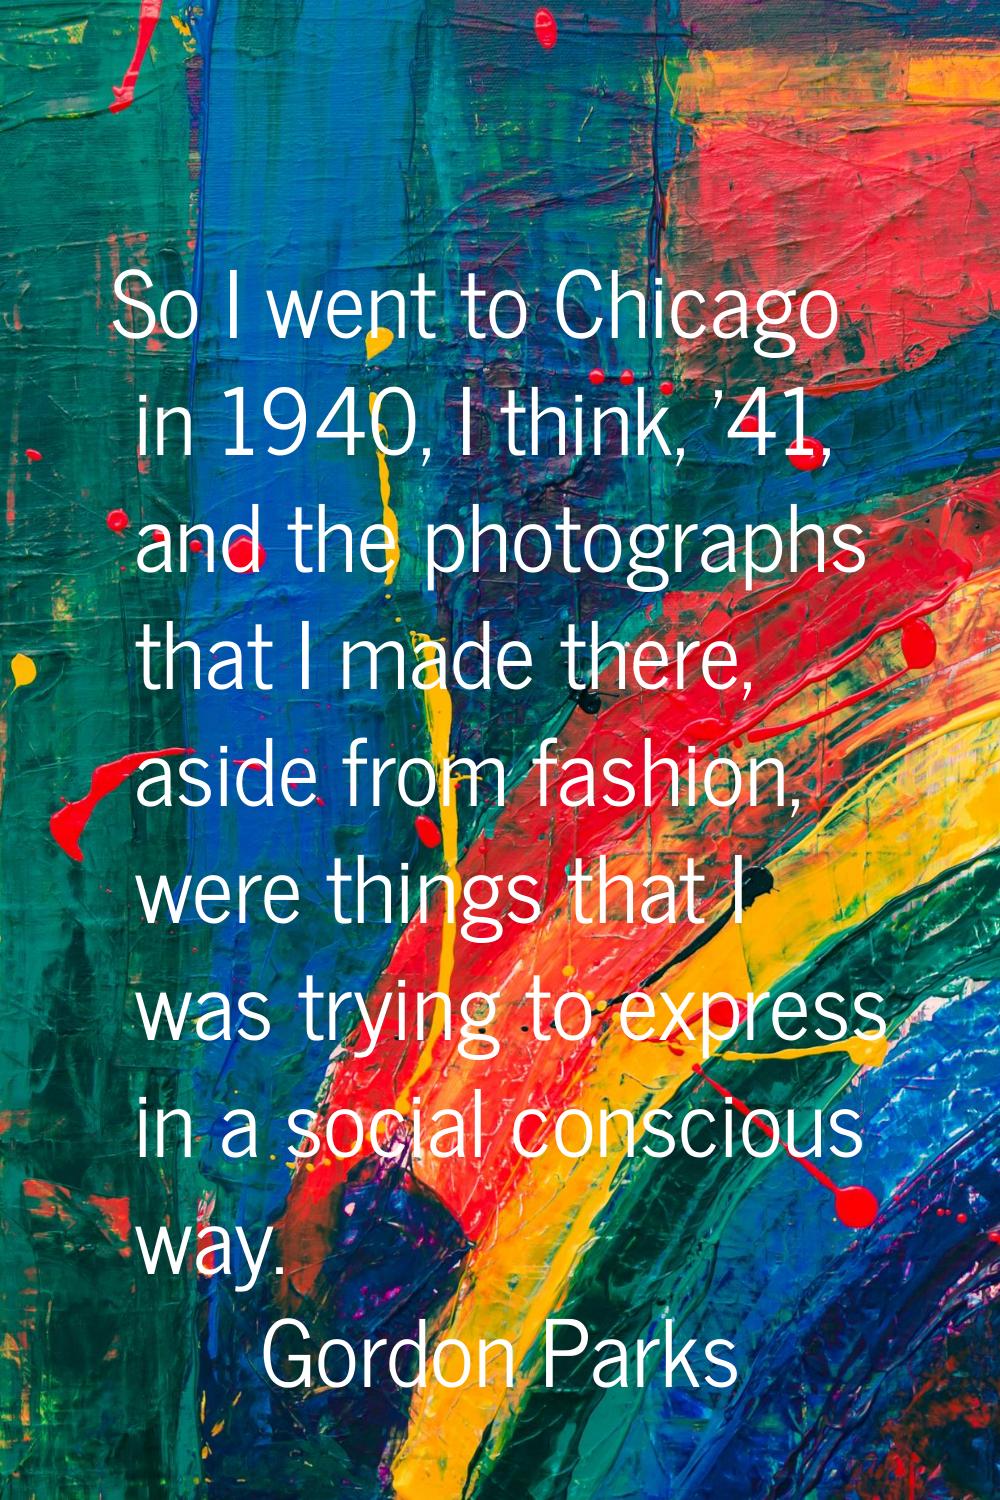 So I went to Chicago in 1940, I think, '41, and the photographs that I made there, aside from fashi